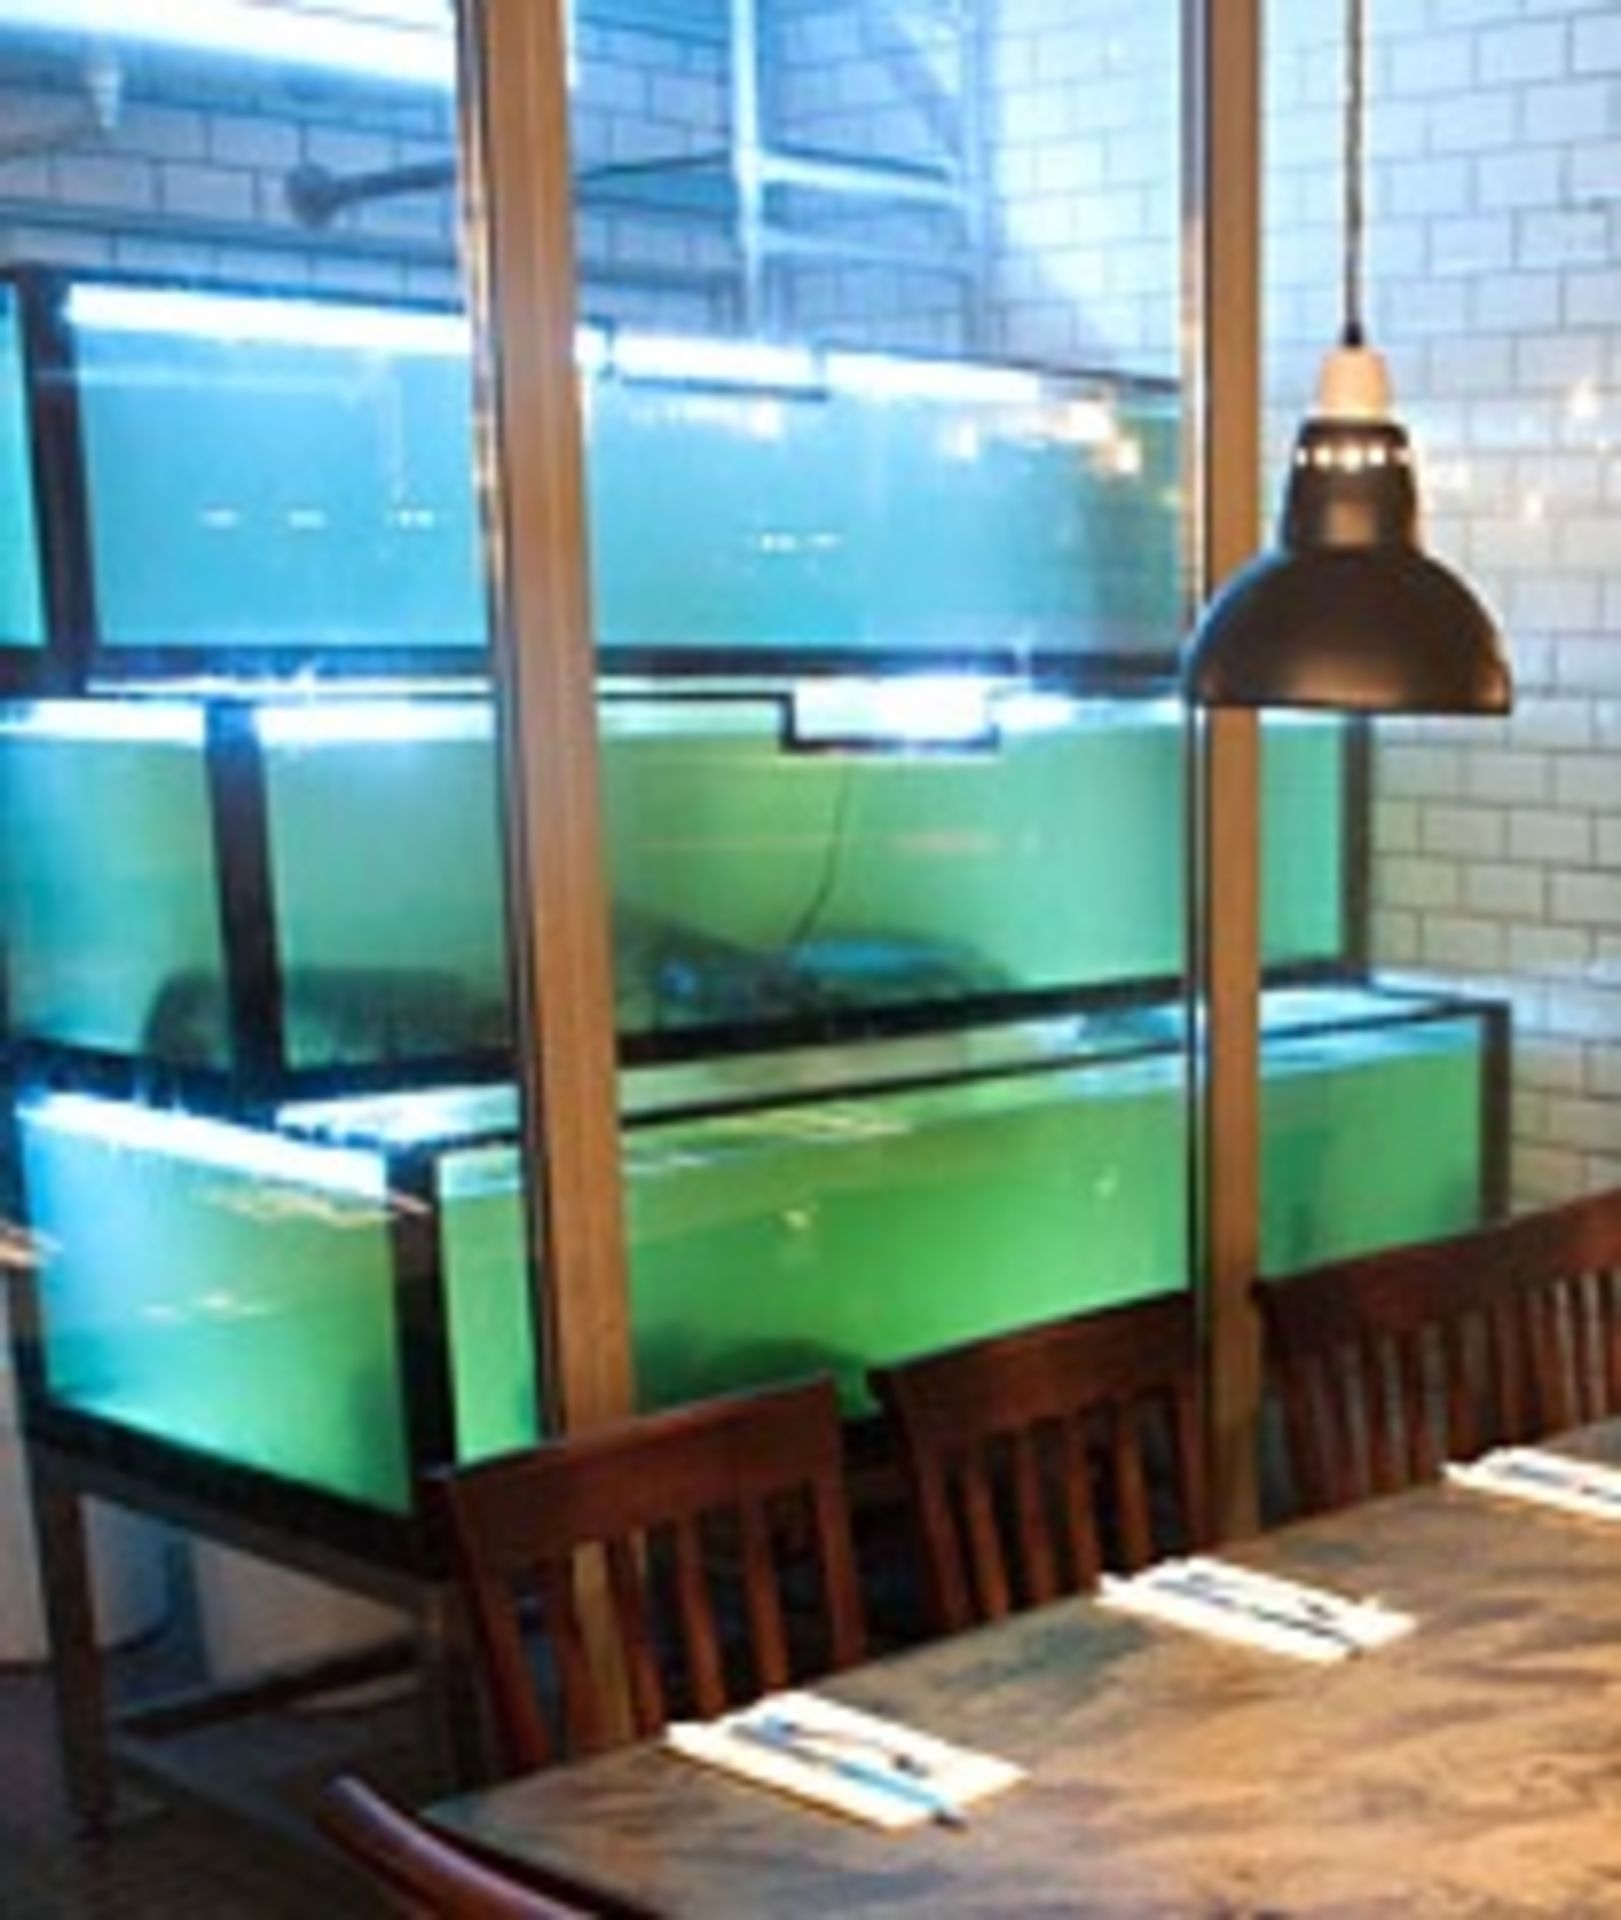 1 x Custom Made 3 Tier Fish Tank - Large Capacity Tank Previously Used For Lobsters by an Upmarket